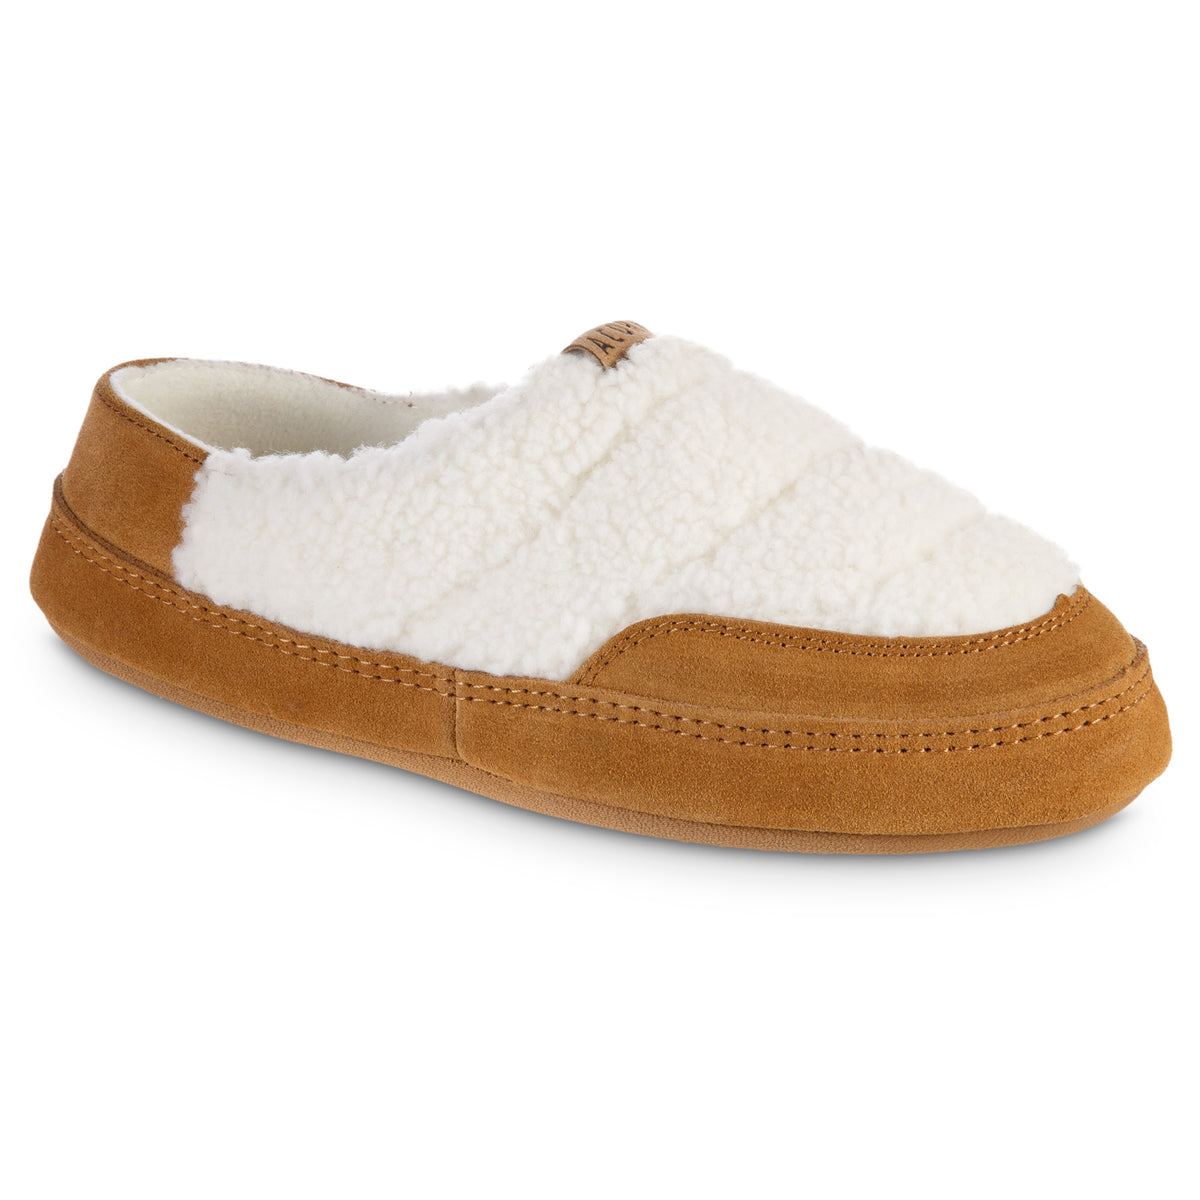 Acorn Women's Quilted Recycled Berber with Suede Hoodback Slippers